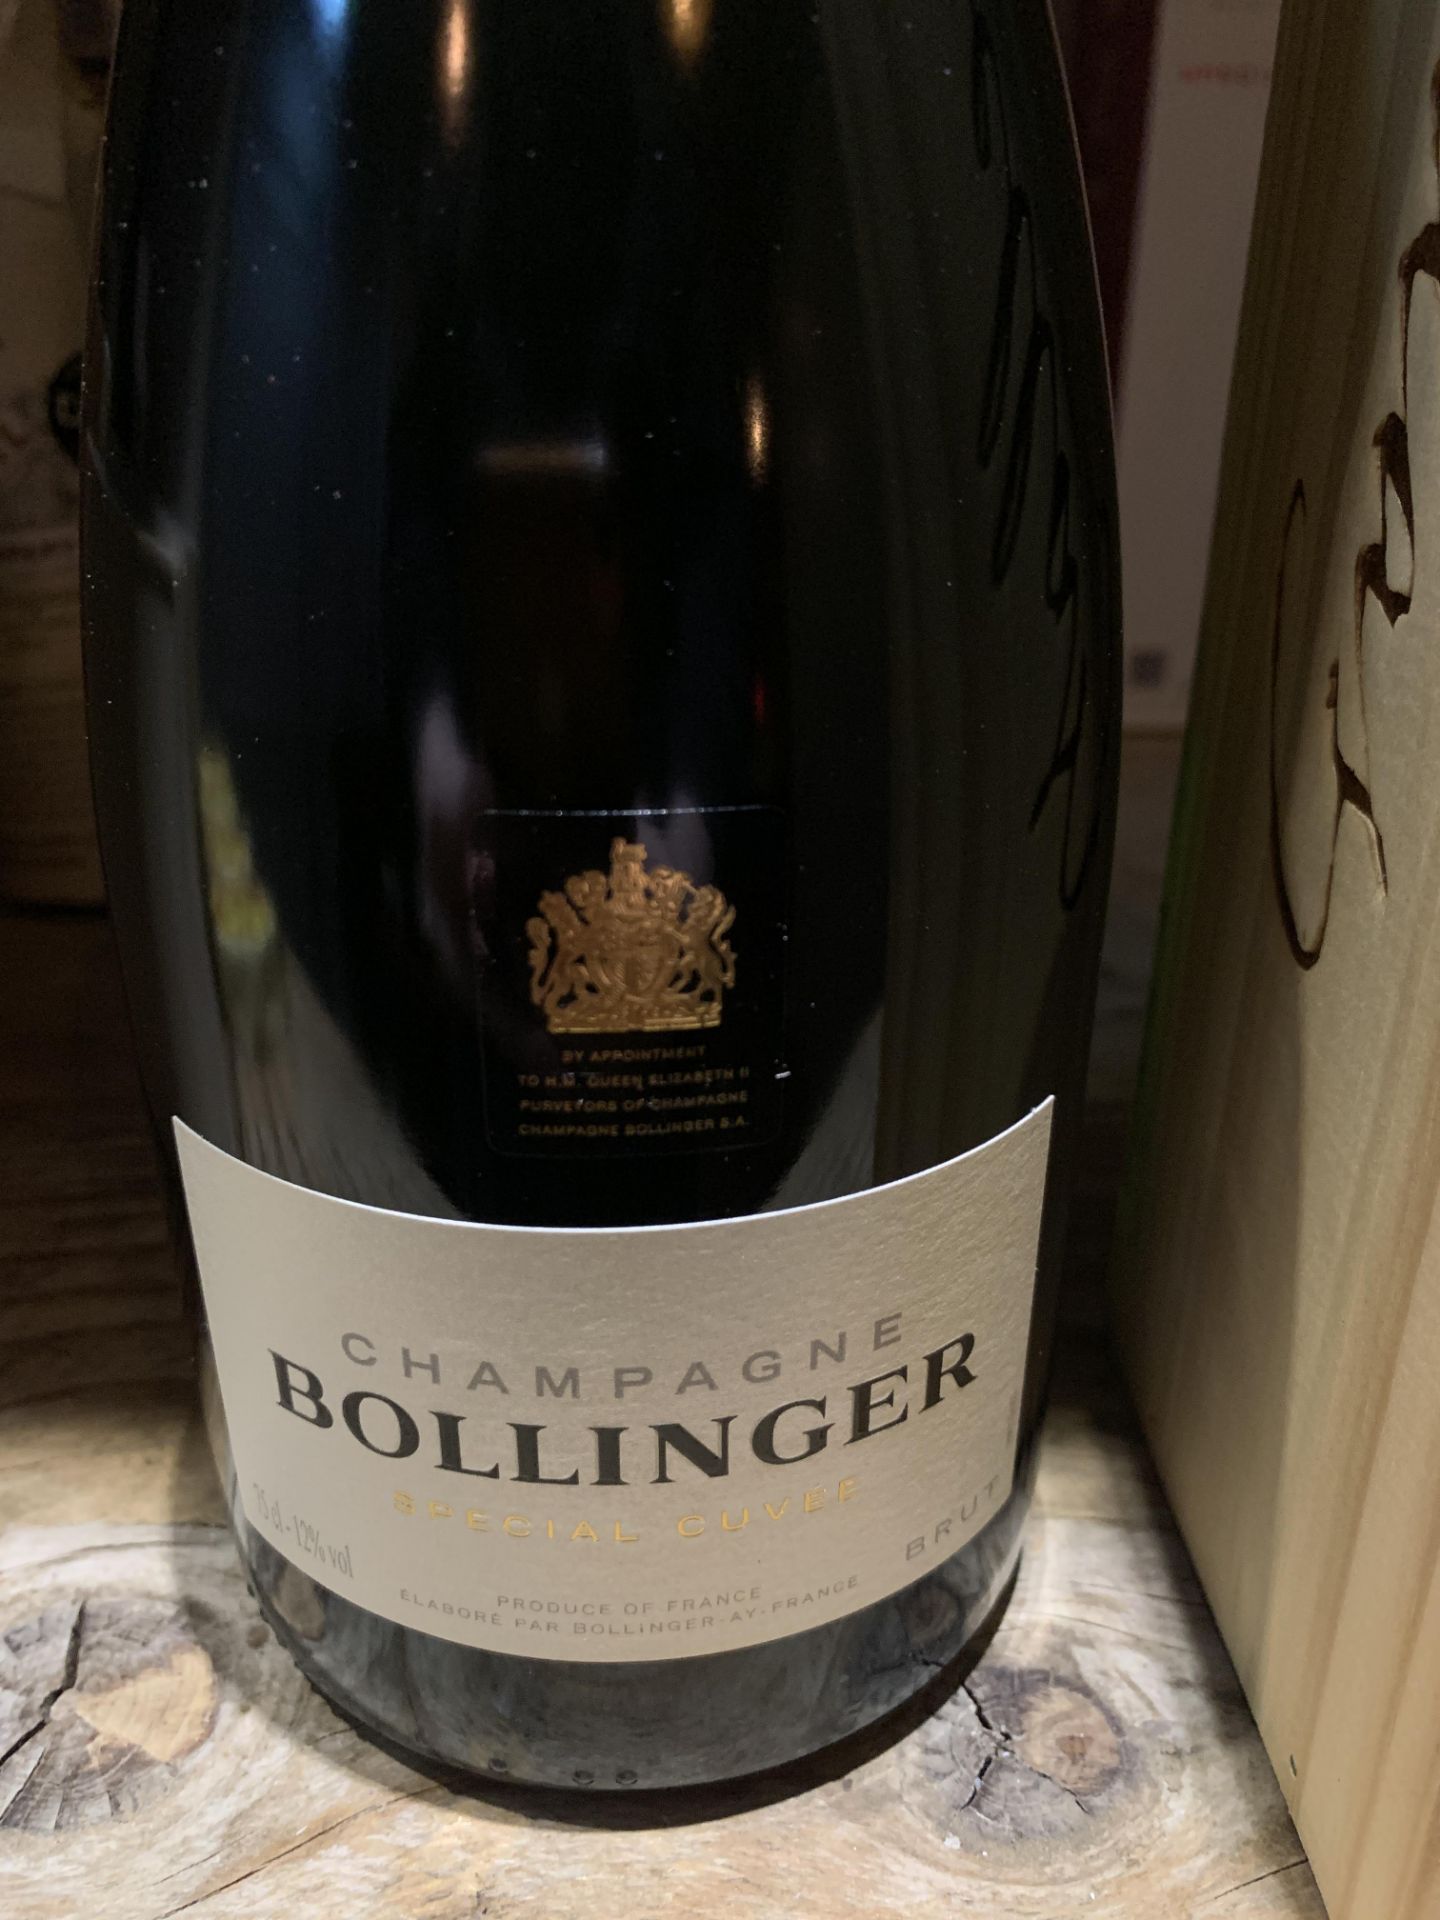 Boxed Bottle of Bollinger Special Cuvee Champagne and a Boxed Bottle of Taylor's Port - Image 3 of 7